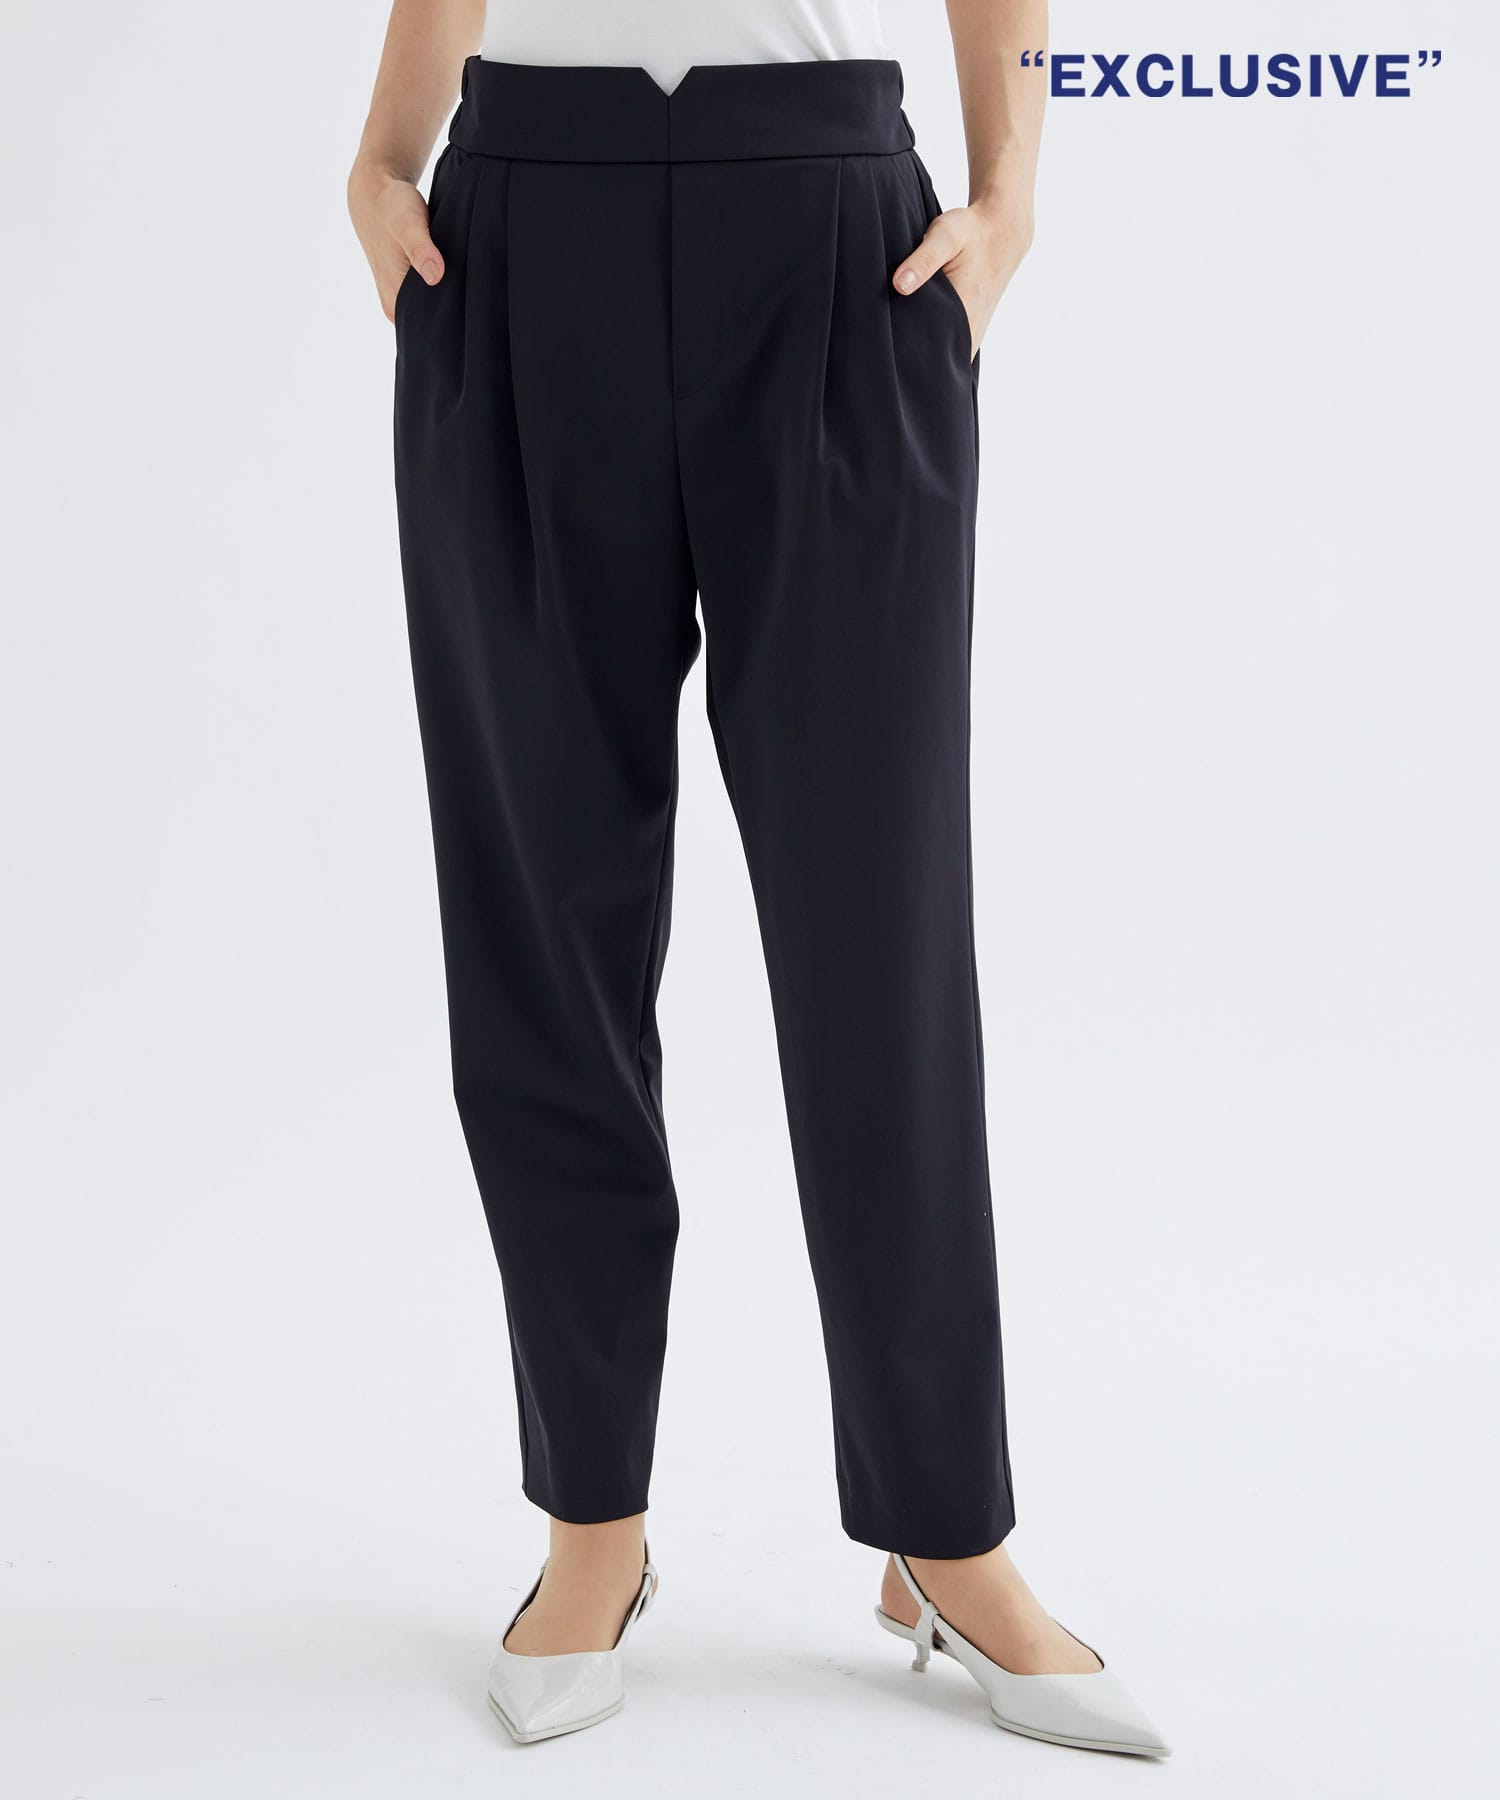 WASHABLE HIGH FANCTION TAPERD PANTS